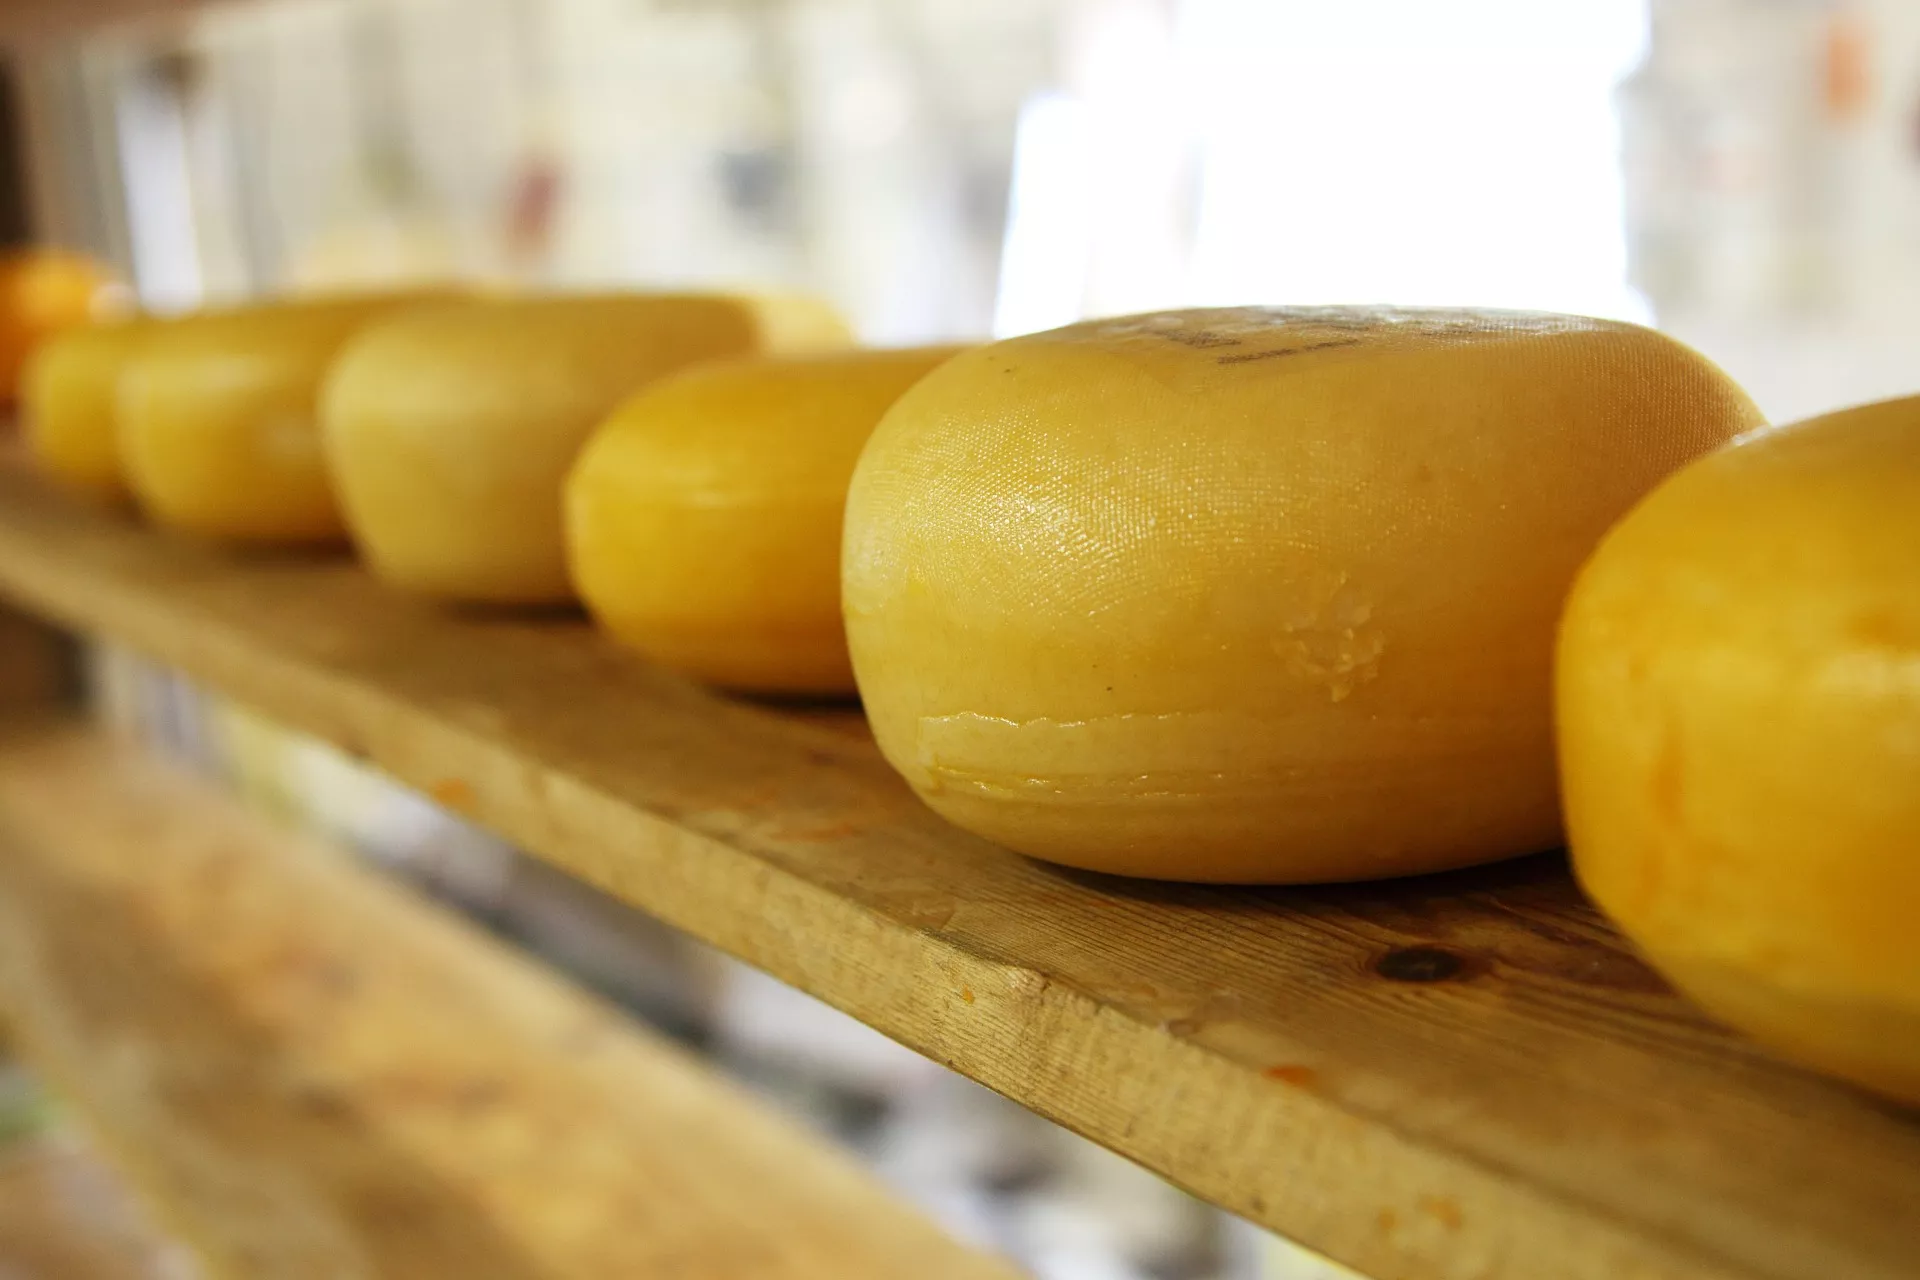 Paroles de Fromagers in France, europe | Dairy - Country Helper